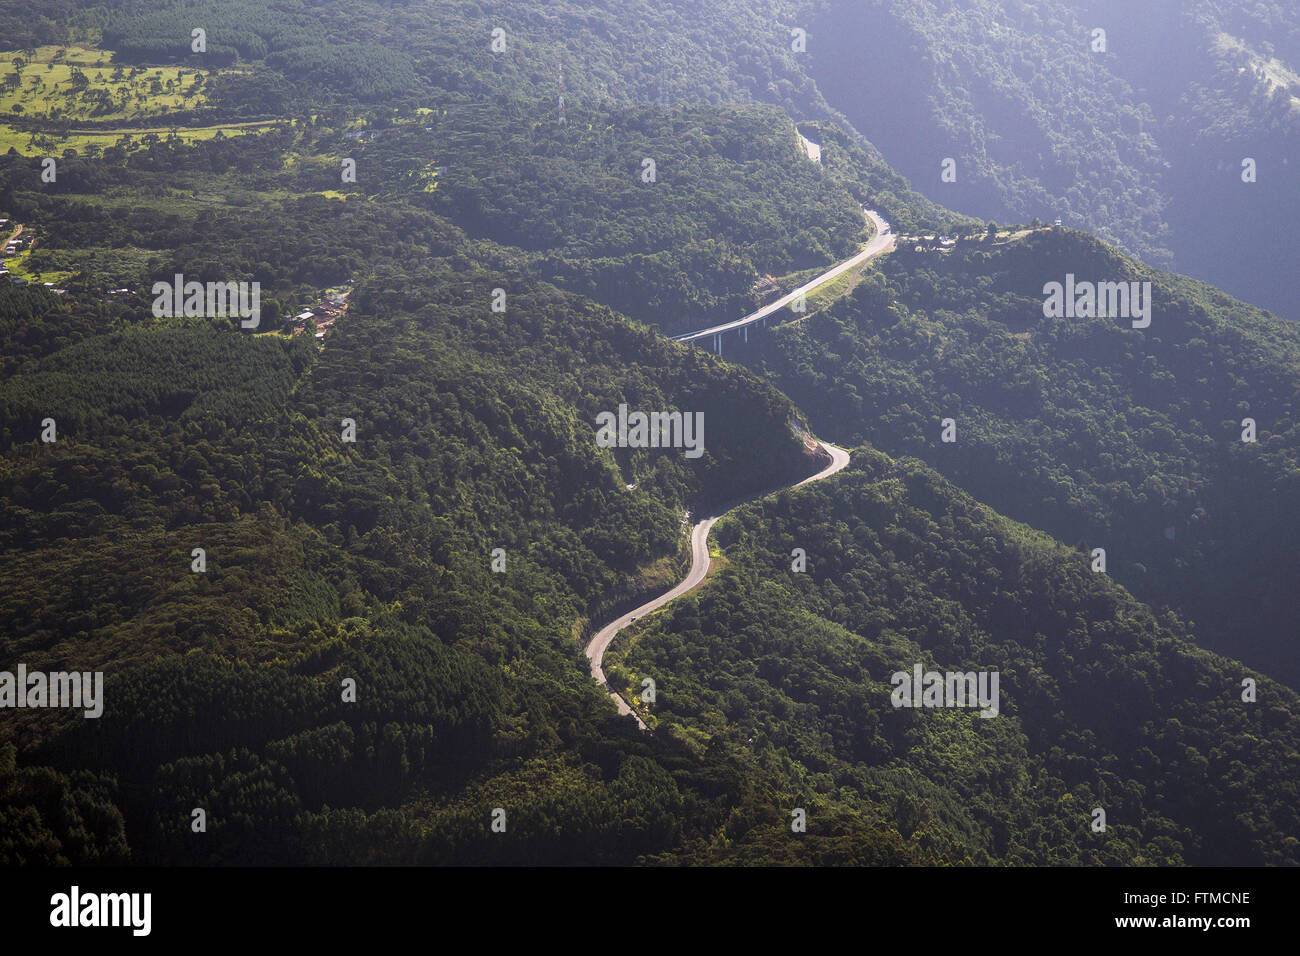 Aerial view of the Sierra Pinto on the edge of Highway Euclid Triches RS-486 Stock Photo